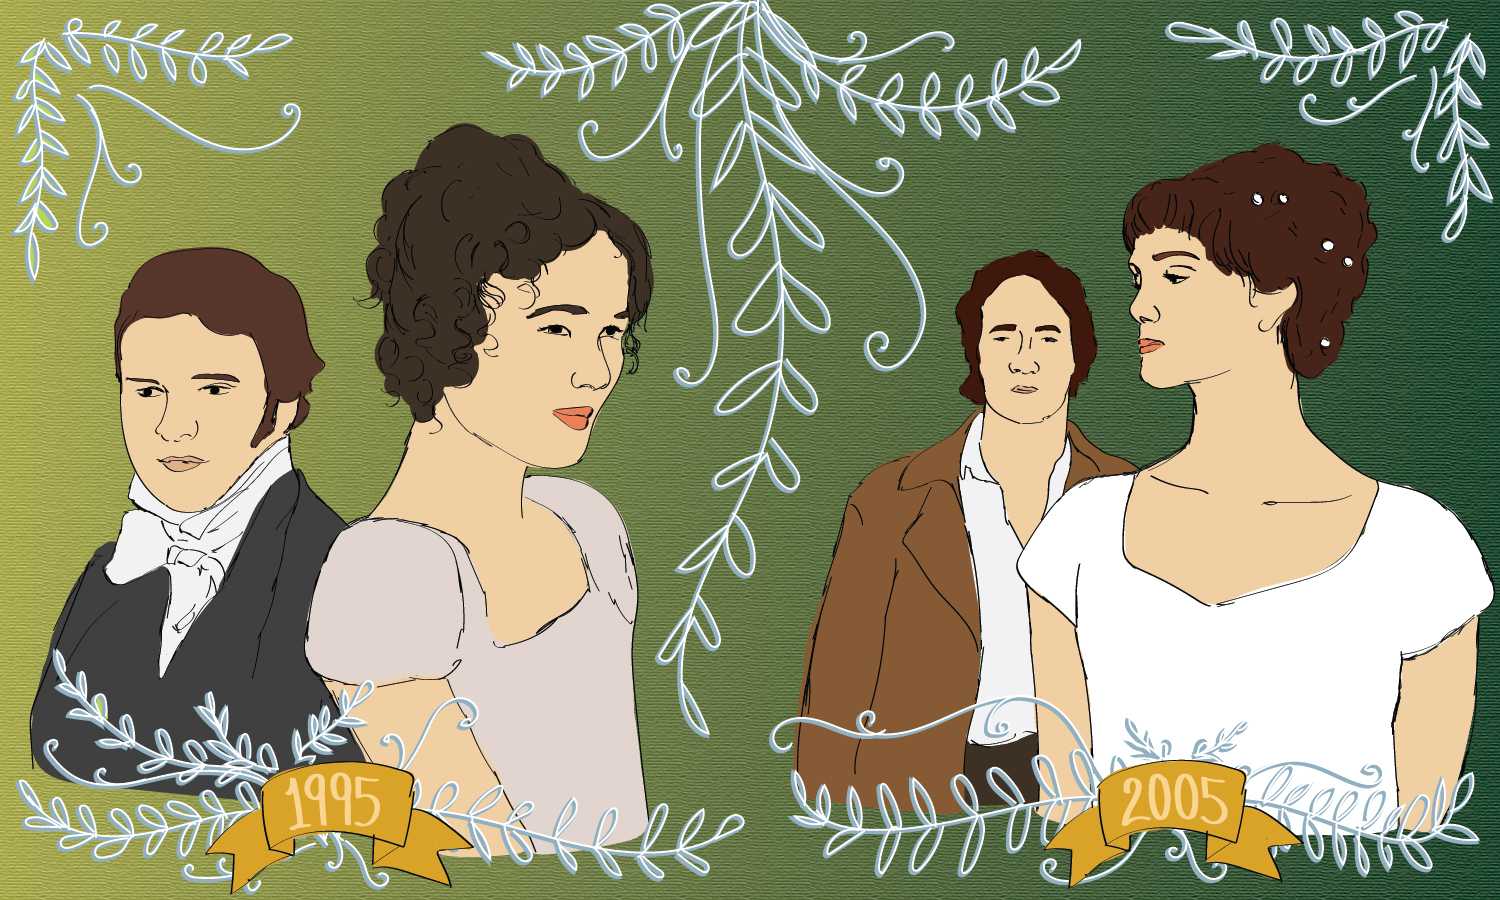 graphic illustration depicting two pairs of Austen characters, one from the 1995 film and the other from the 2005 TV adaptation